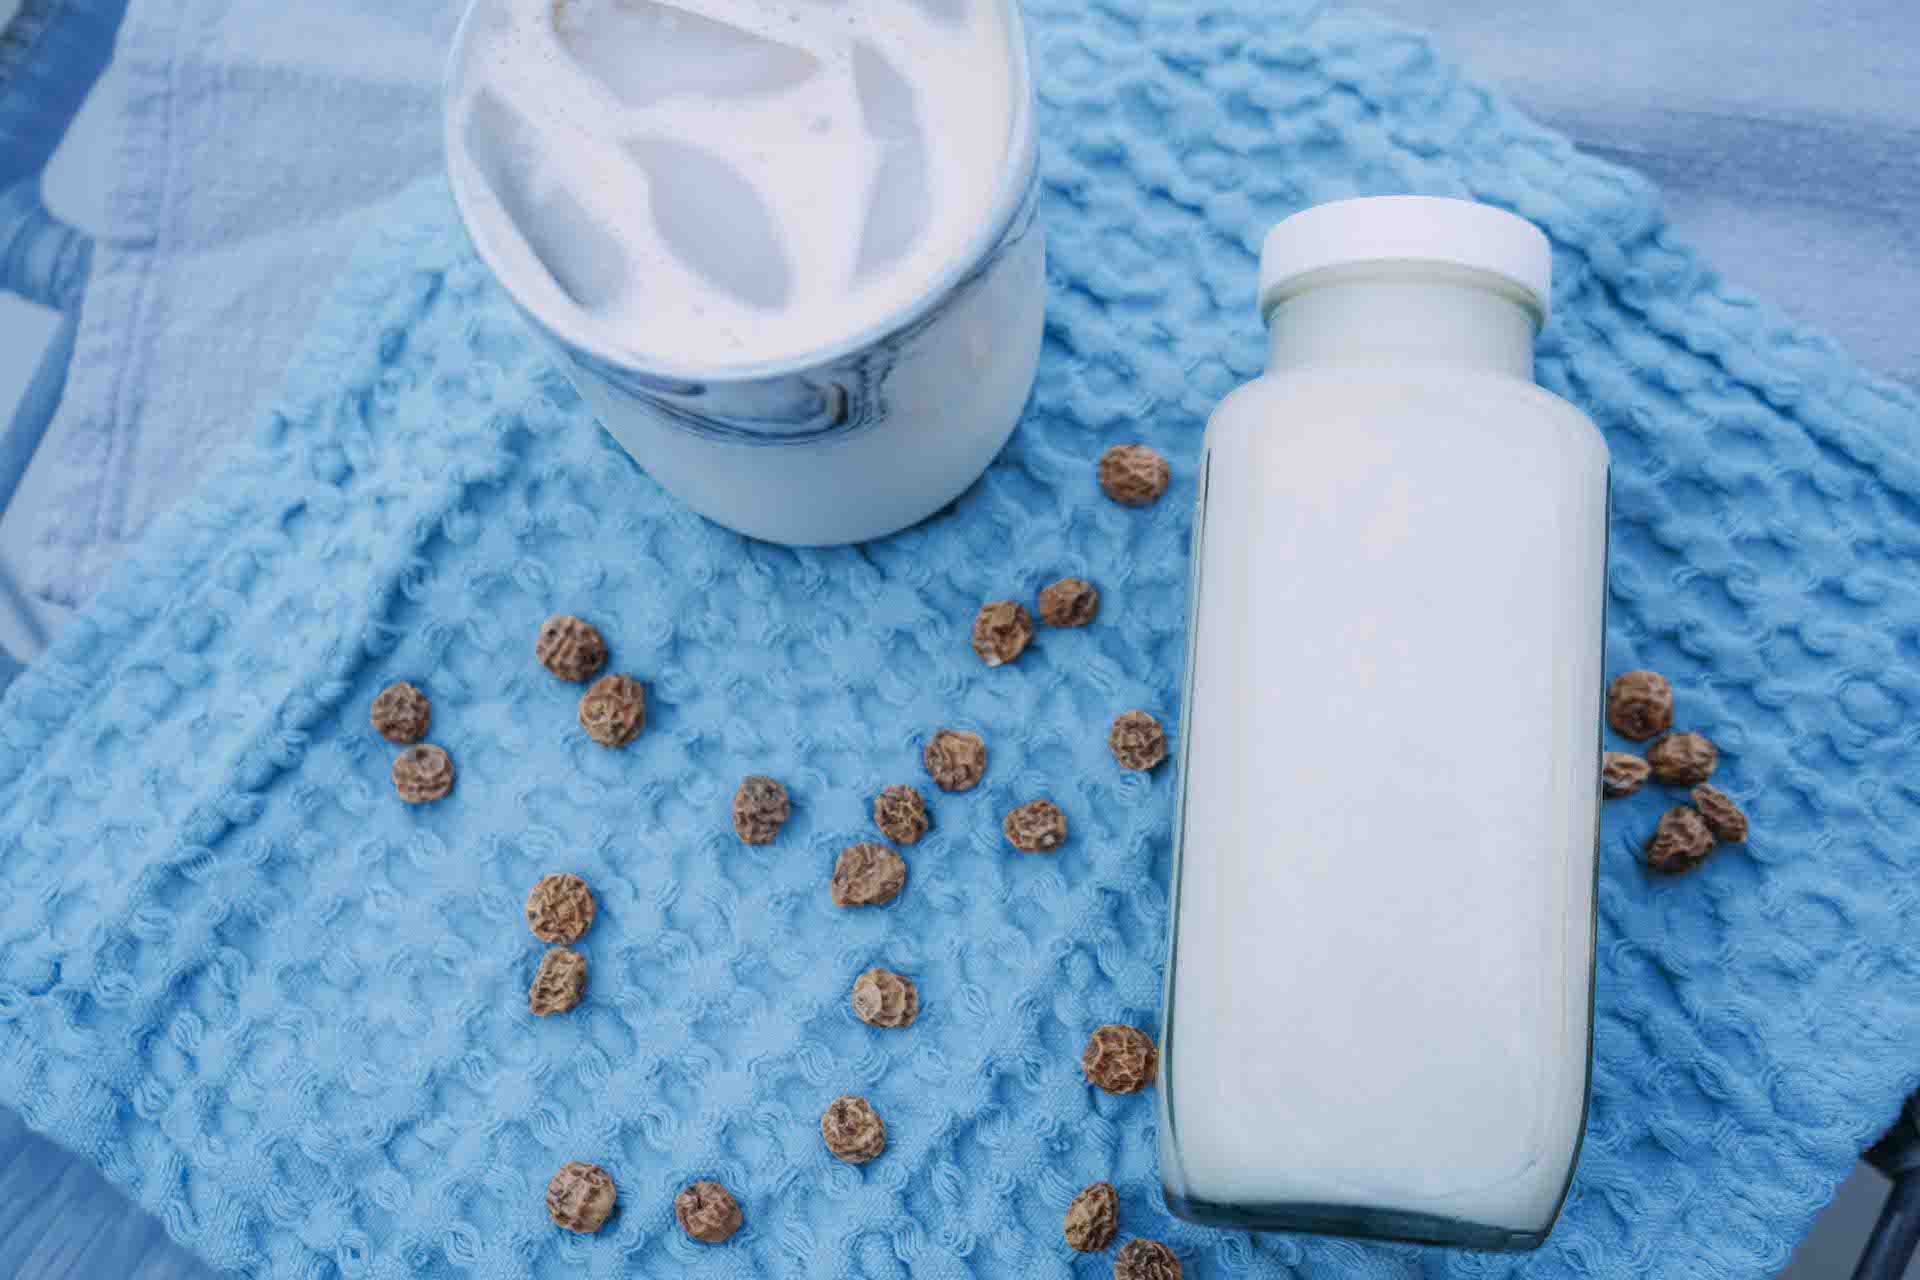 Tiger Nut Milk Recipe - GLW; Click here to learn how to make tiger nut milk on GLW! Tiger nuts are not actually nuts, they are tubers and they are filled with nutrients and antioxidants. I purchased a bag of tiger nuts with the intention of making milk because I had seen it online as a good nut free alternative that had a naturally sweet flavor and tons of benefits. Tiger nut recipes sweets. Tiger nut flour recipes autoimmune paleo. Tiger nut milk recipe. Tiger nut recipes autoimmune paleo.